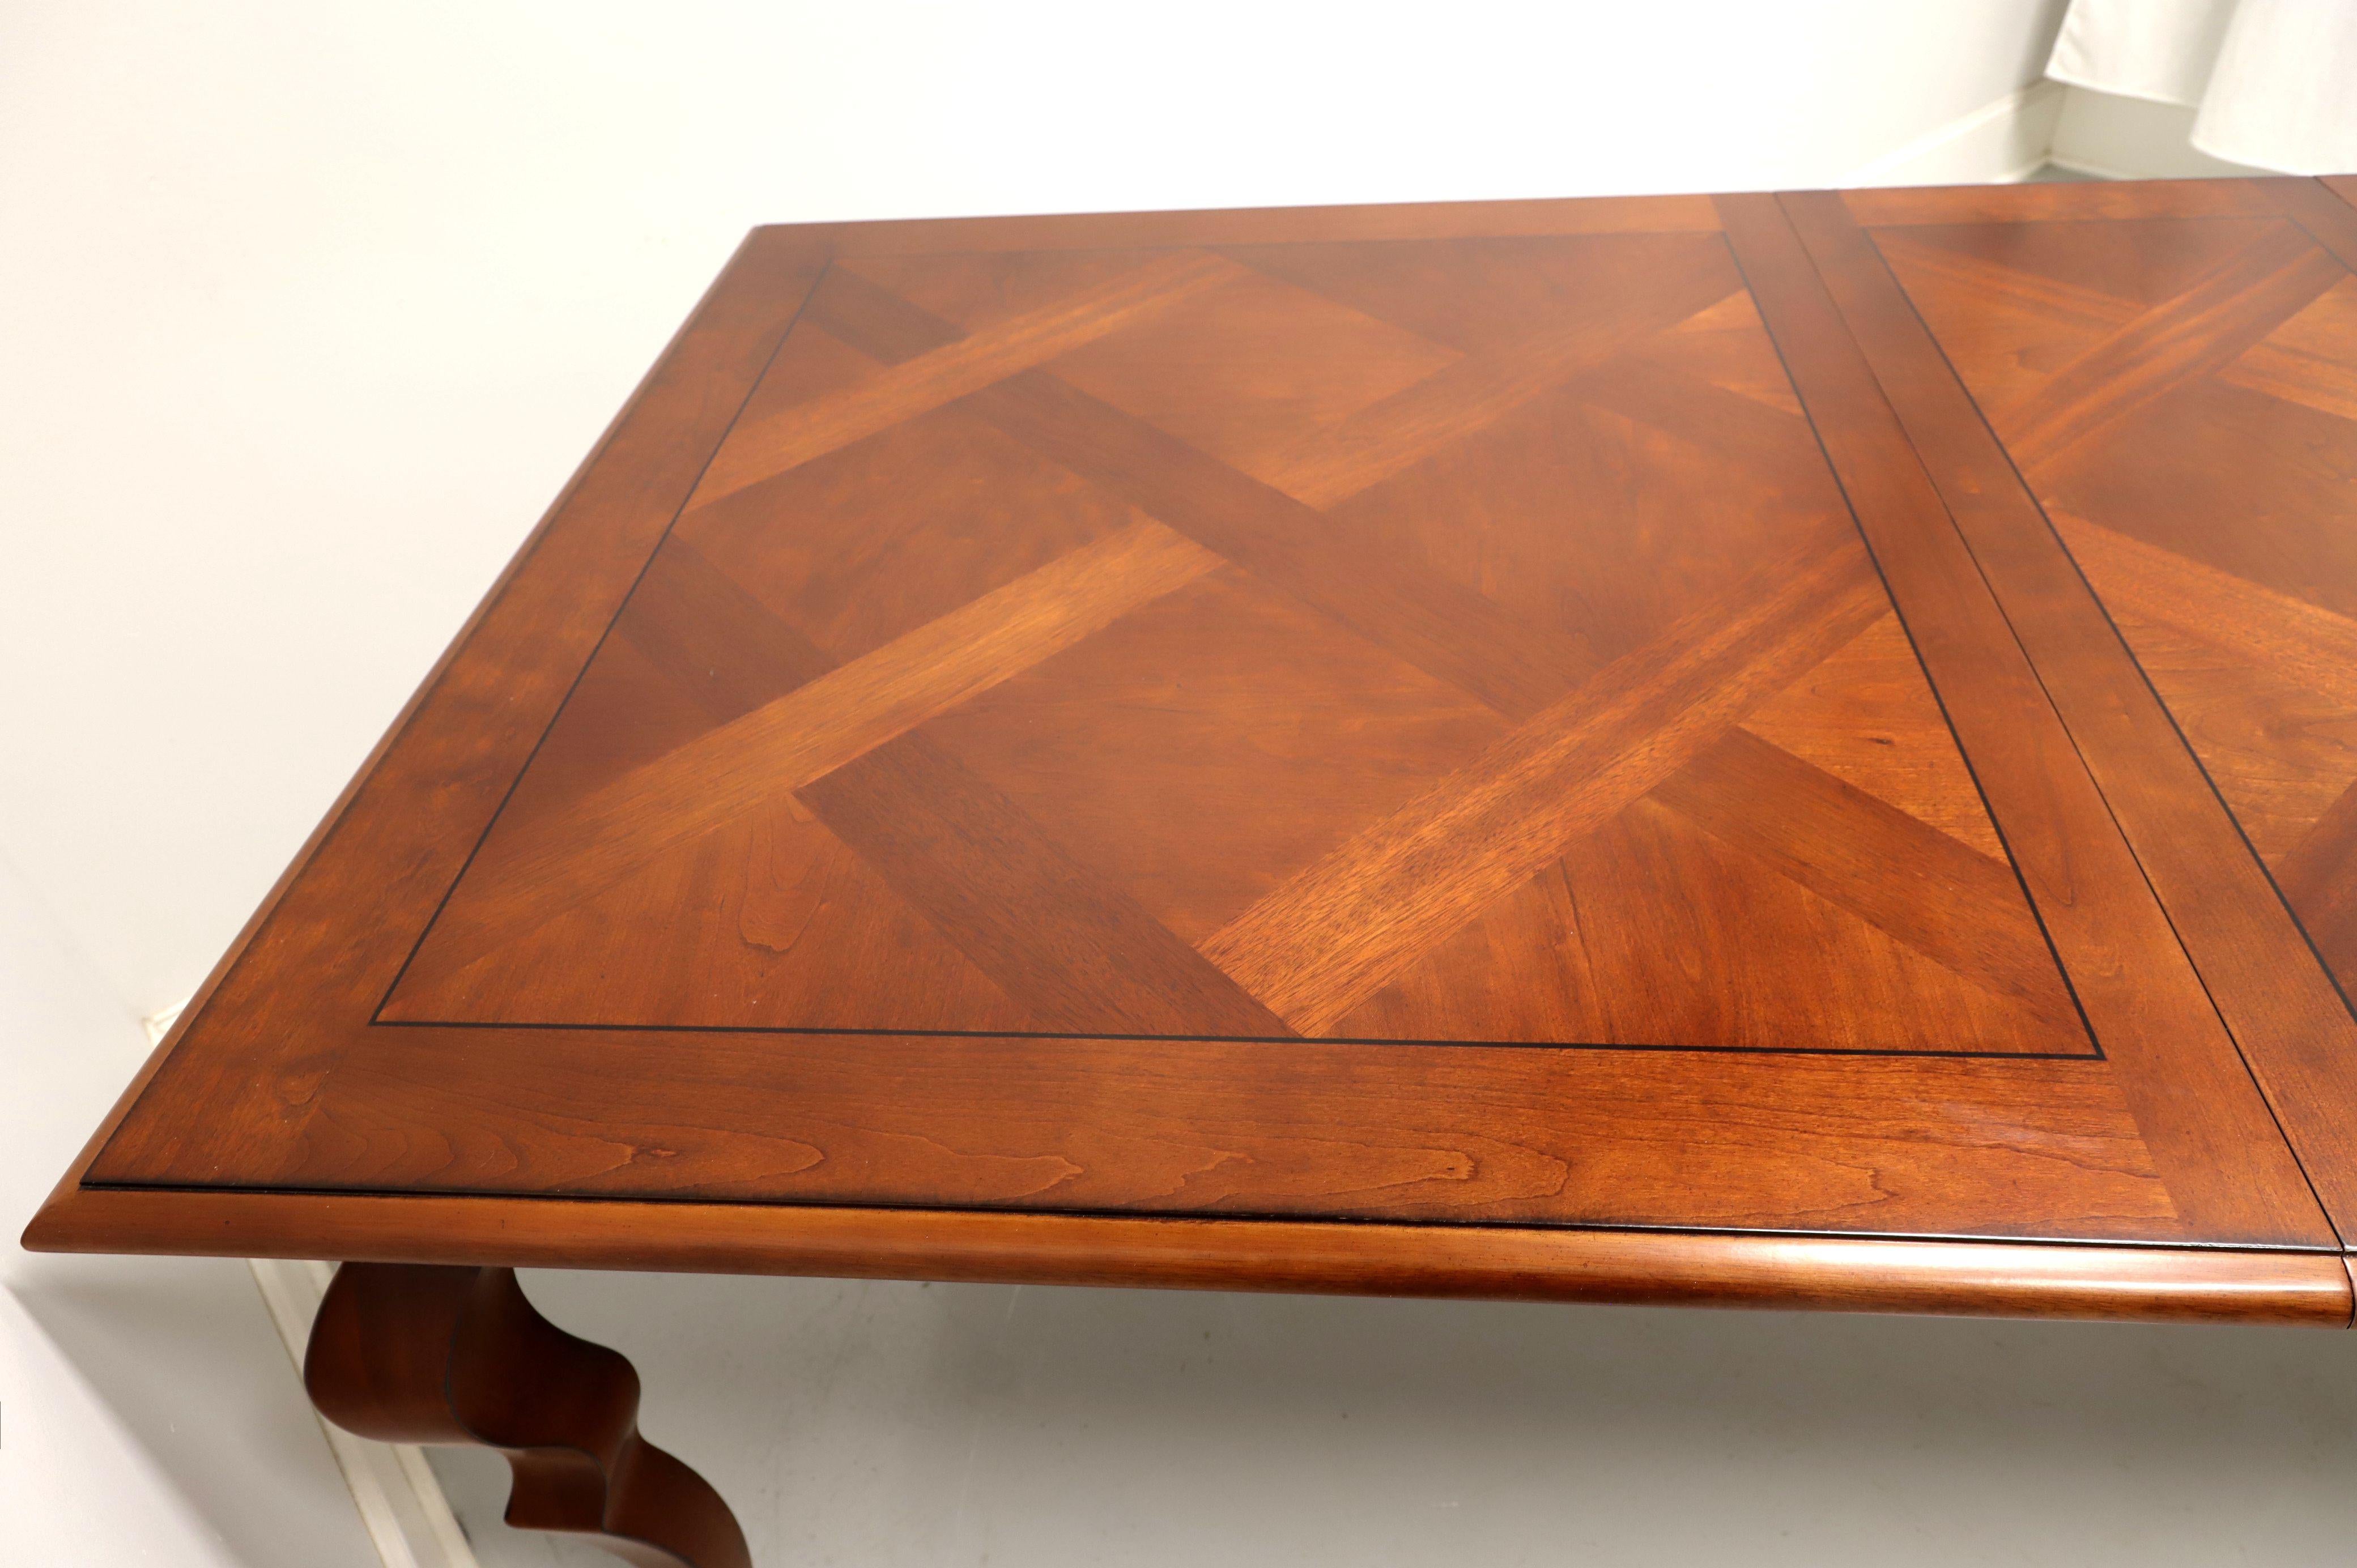 French Provincial HARDEN Solid Cherry French Country Style Parquetry Dining Table